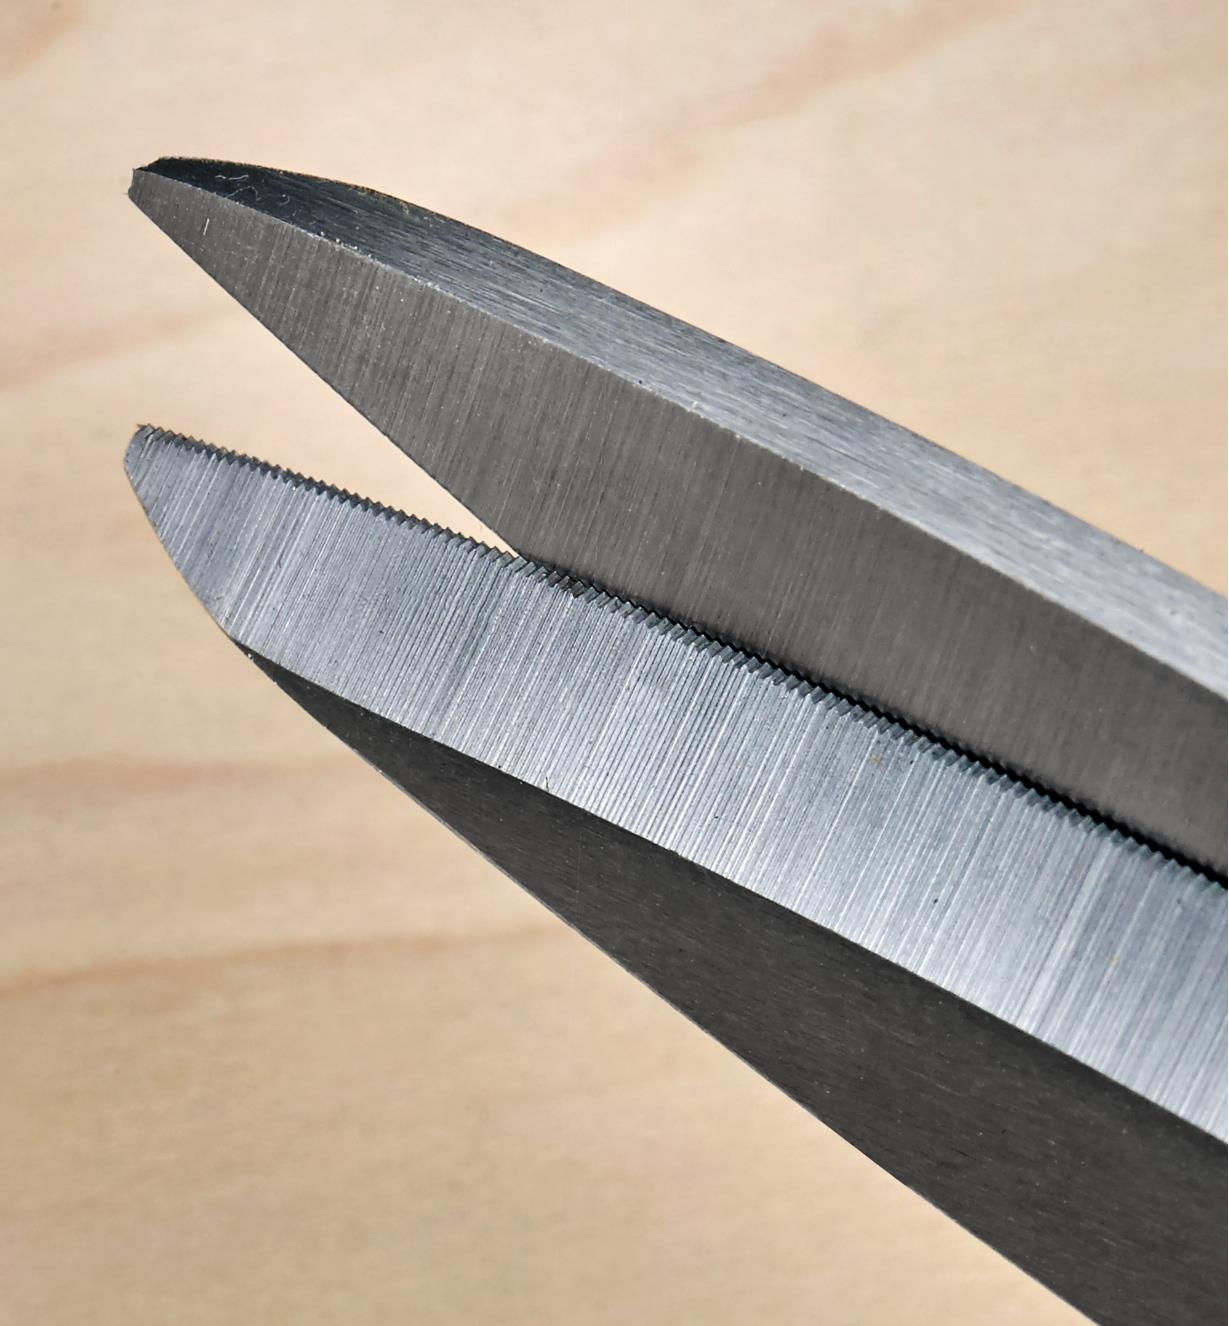 A close view of the micro-serrations along the edge of one of the shear blades